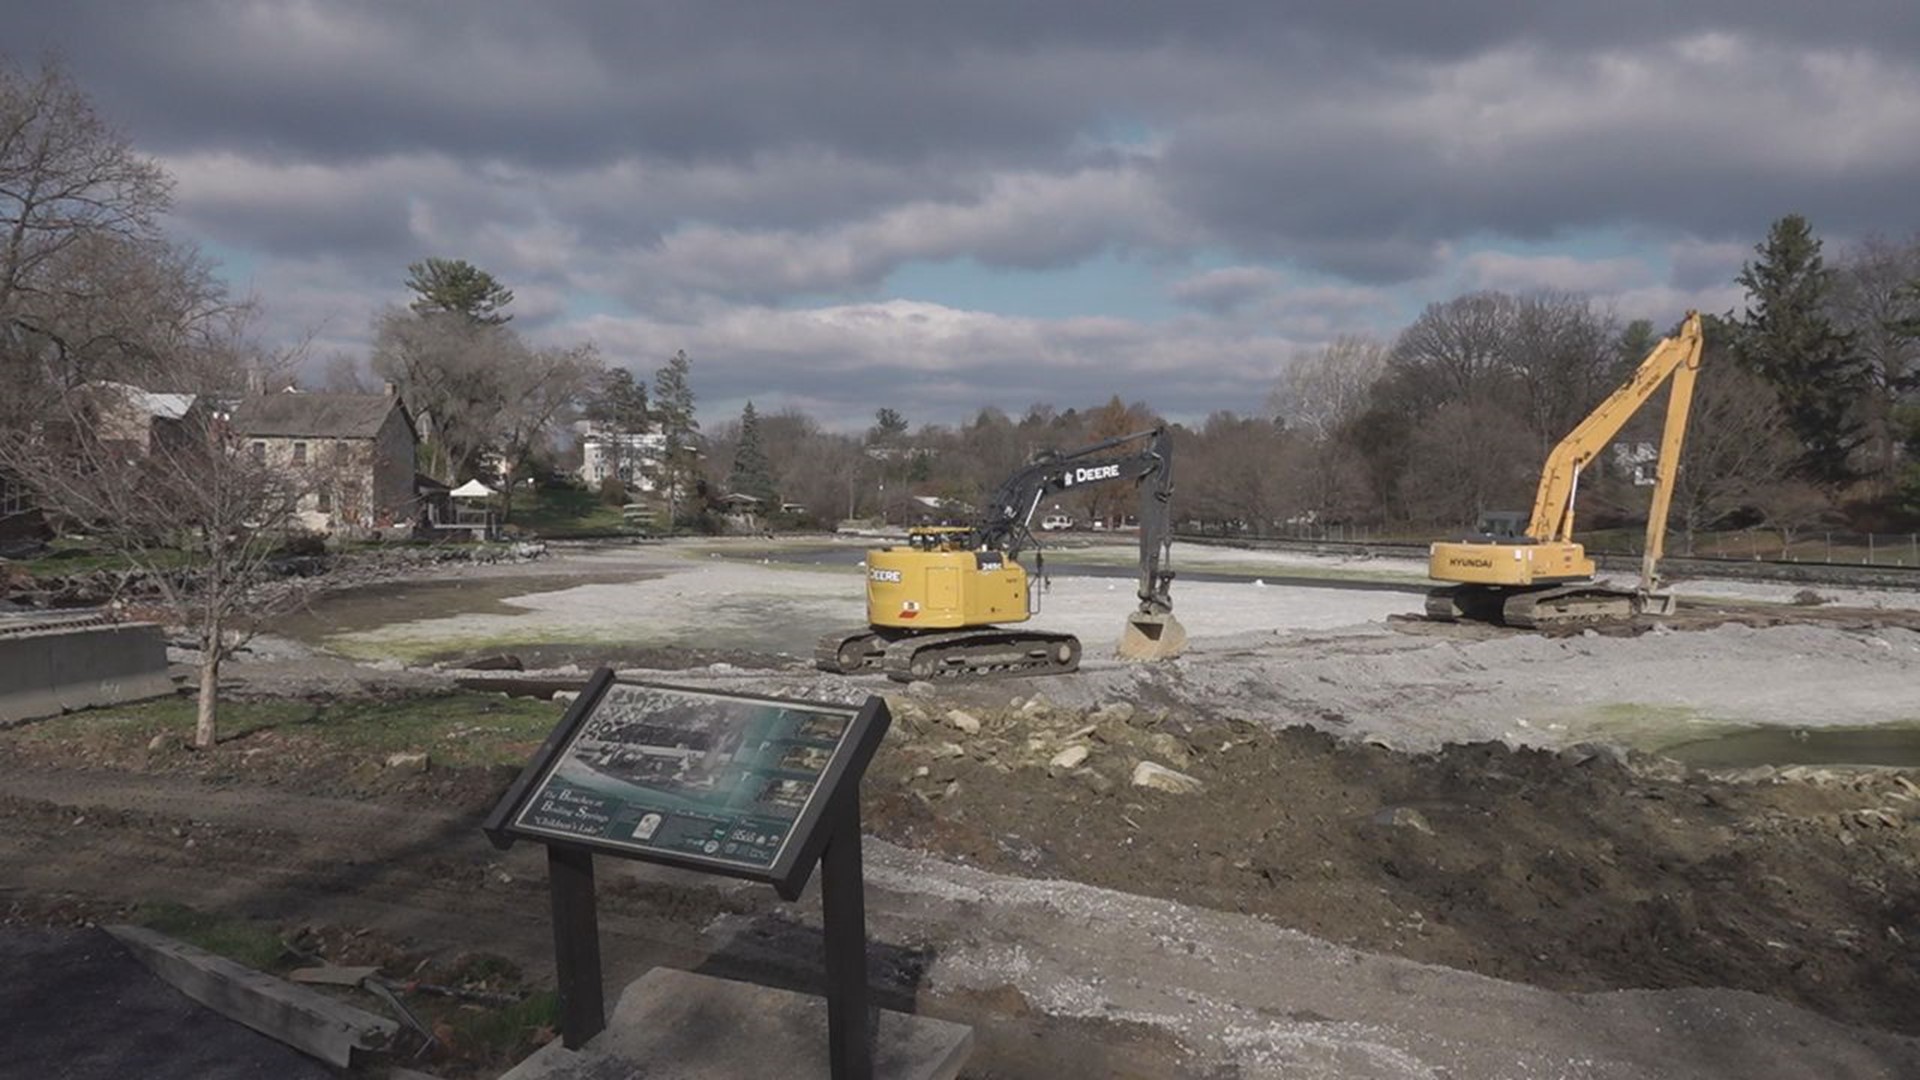 Work is expected to be completed by next summer but it's impacting this year's holiday celebrations in Boiling Springs.